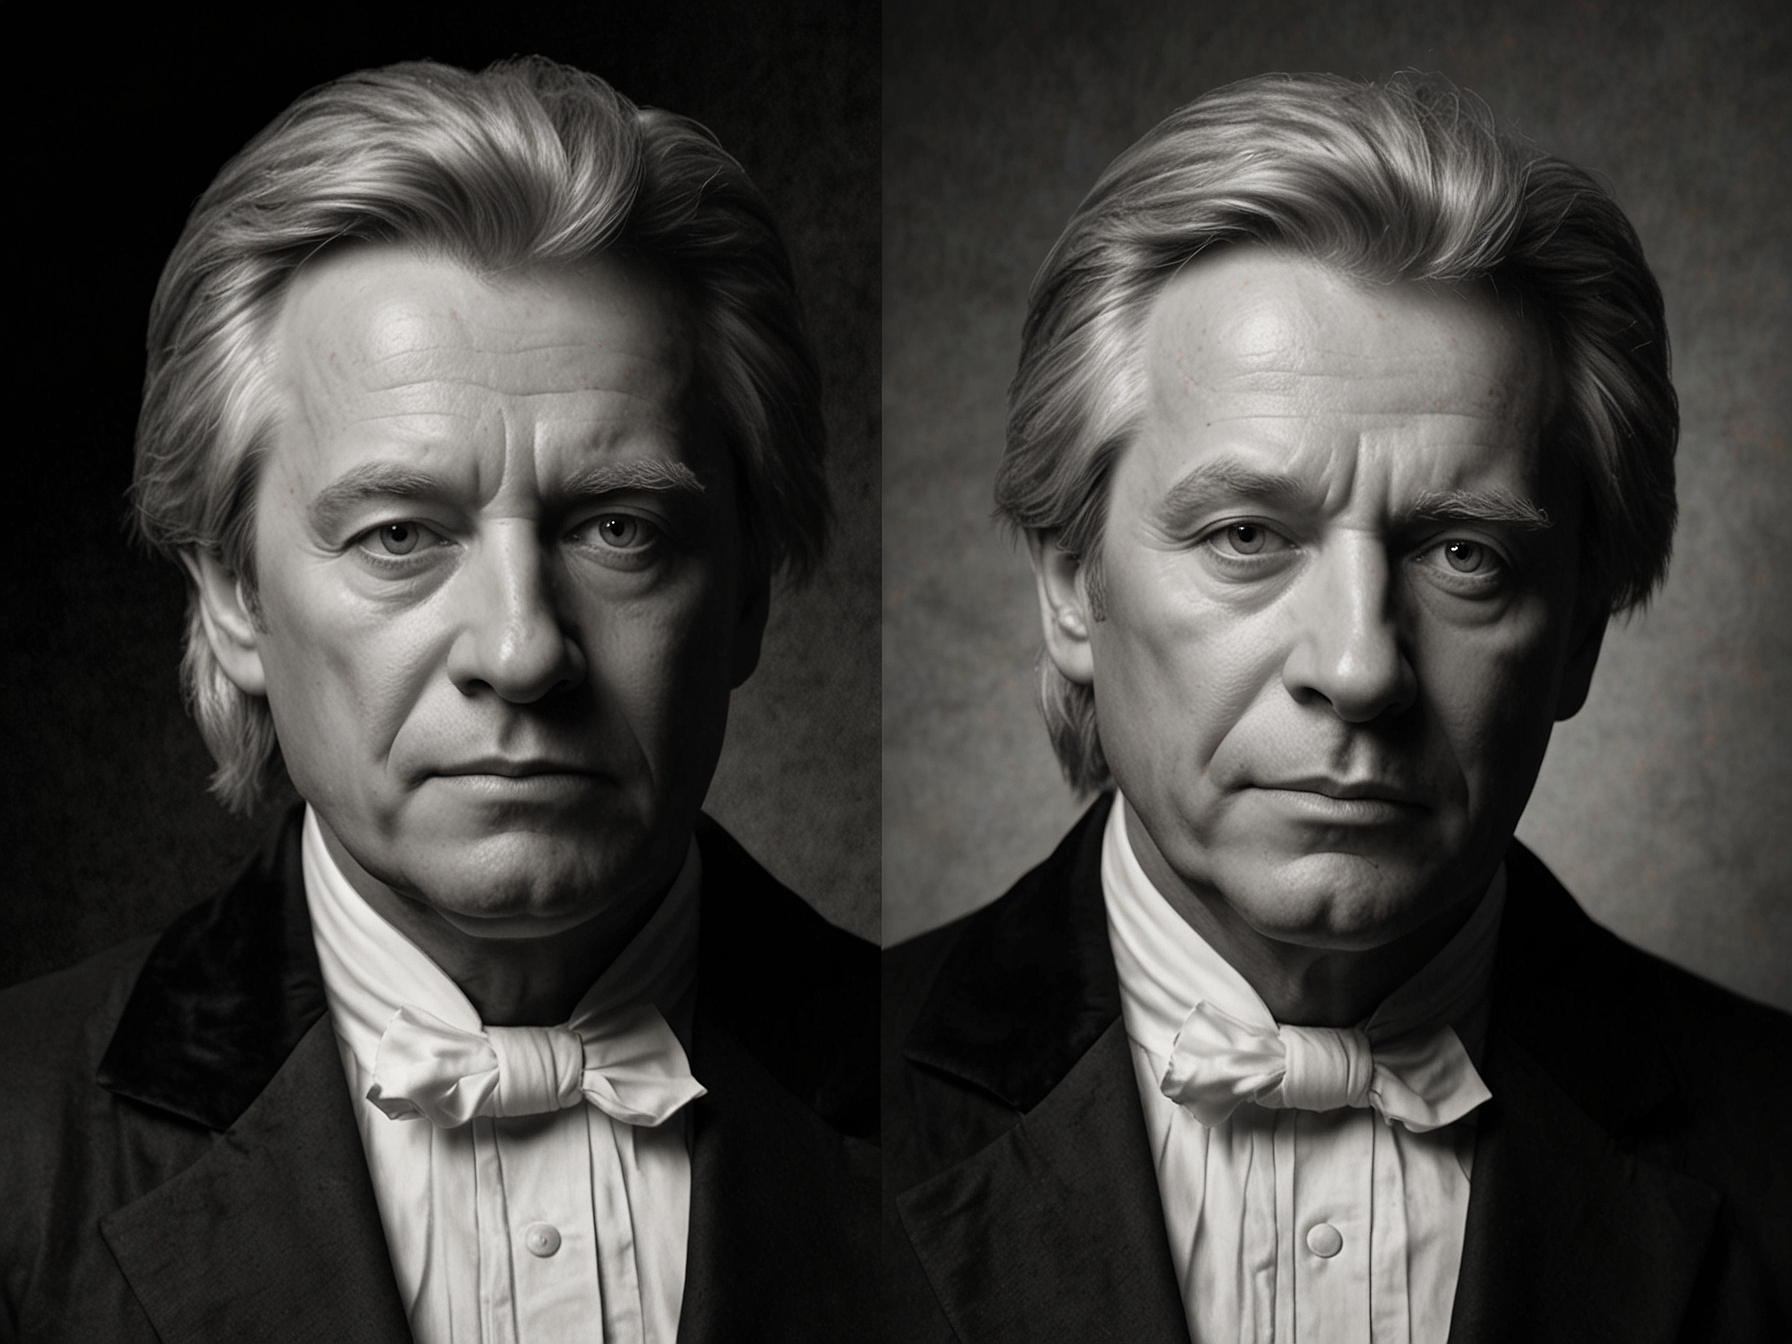 A side-by-side comparison of the forensic reconstruction of Mozart and an image of Ken Barlow, highlighting their uncanny facial similarities that have amused fans online.